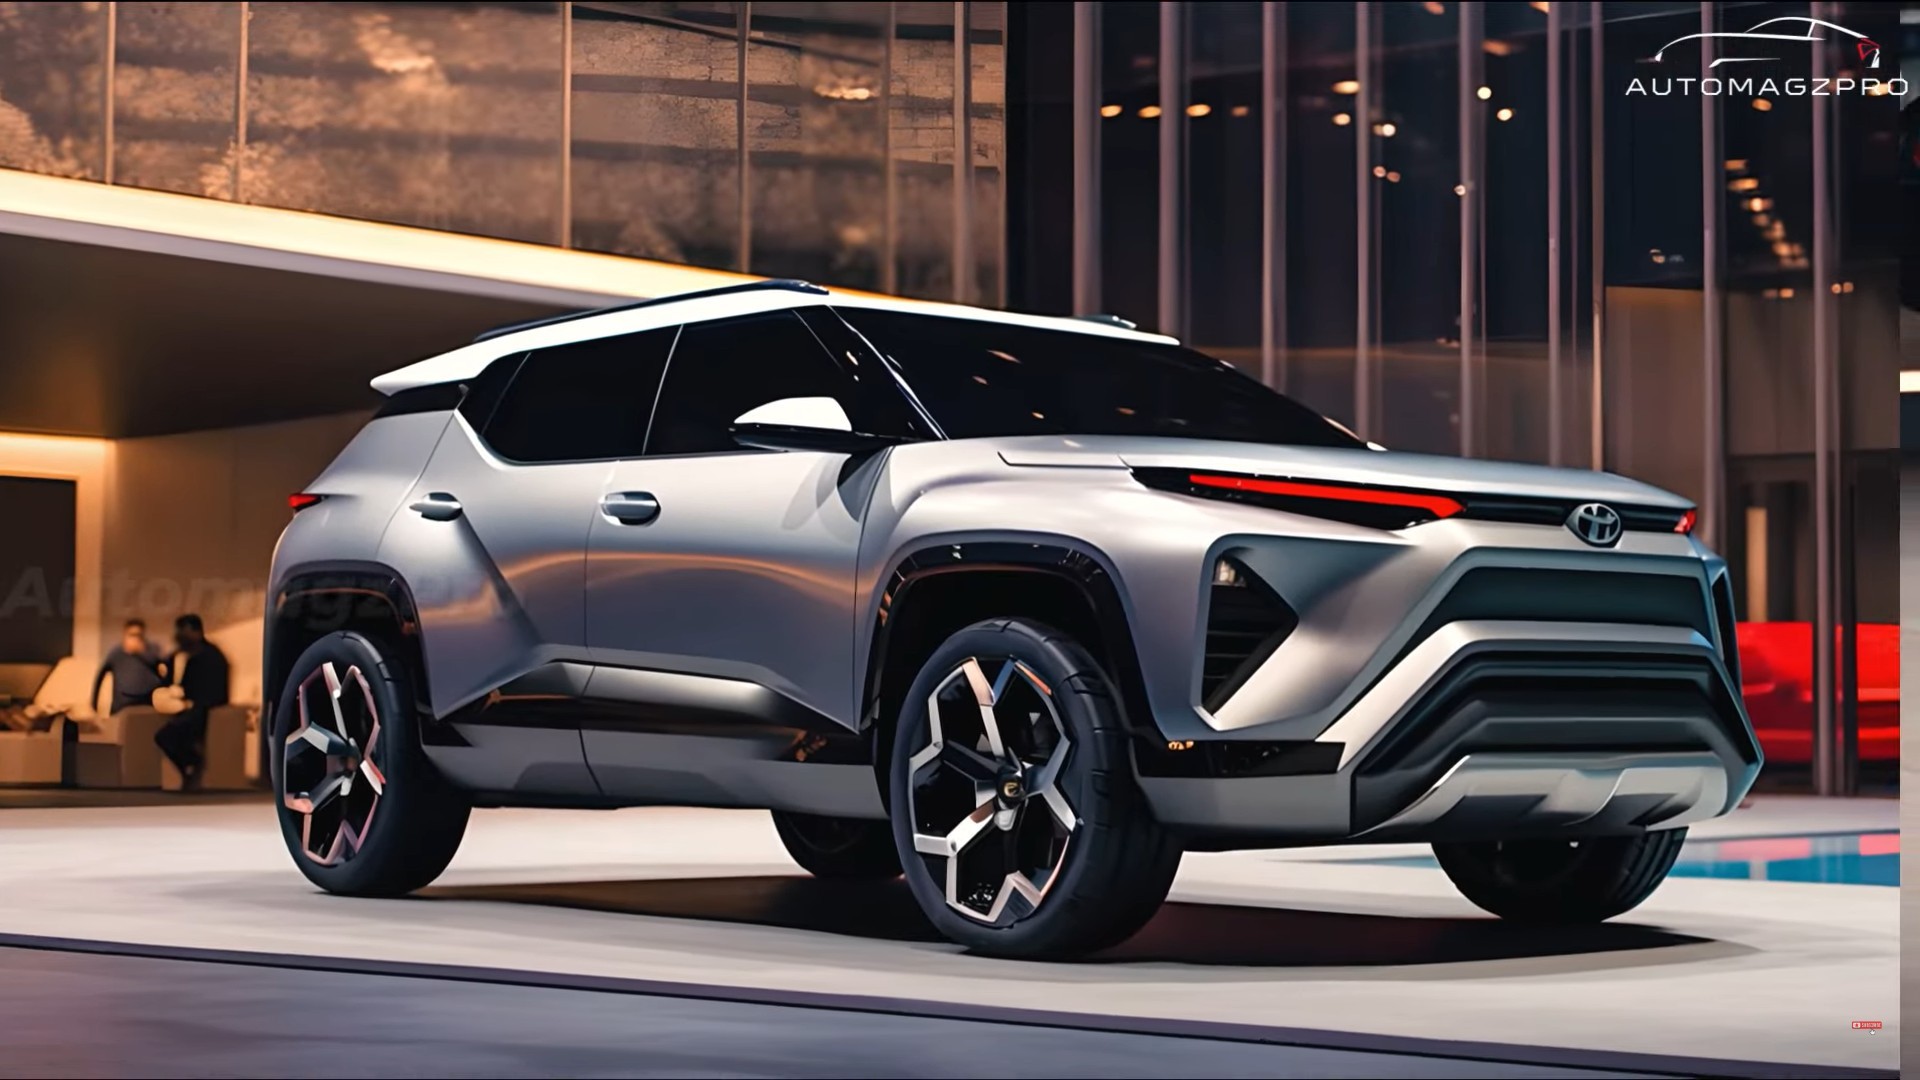 all-new-toyota-rav4-arrives-early-in-the-virtual-world-complete-with-ev-model-4.jpg